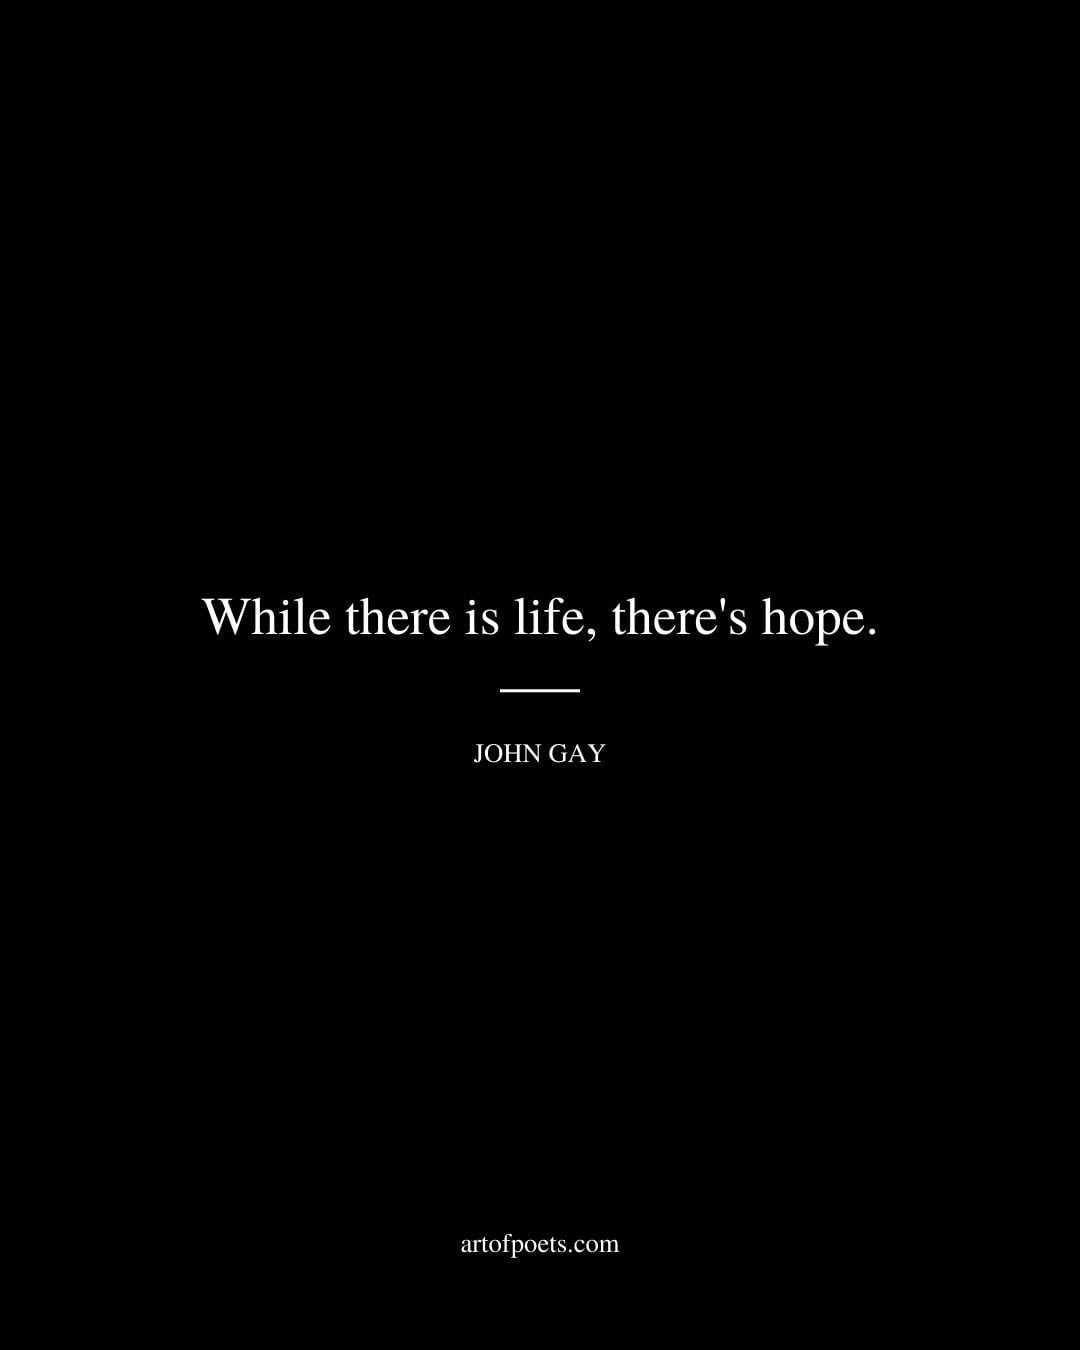 While there is life theres hope. John Gay